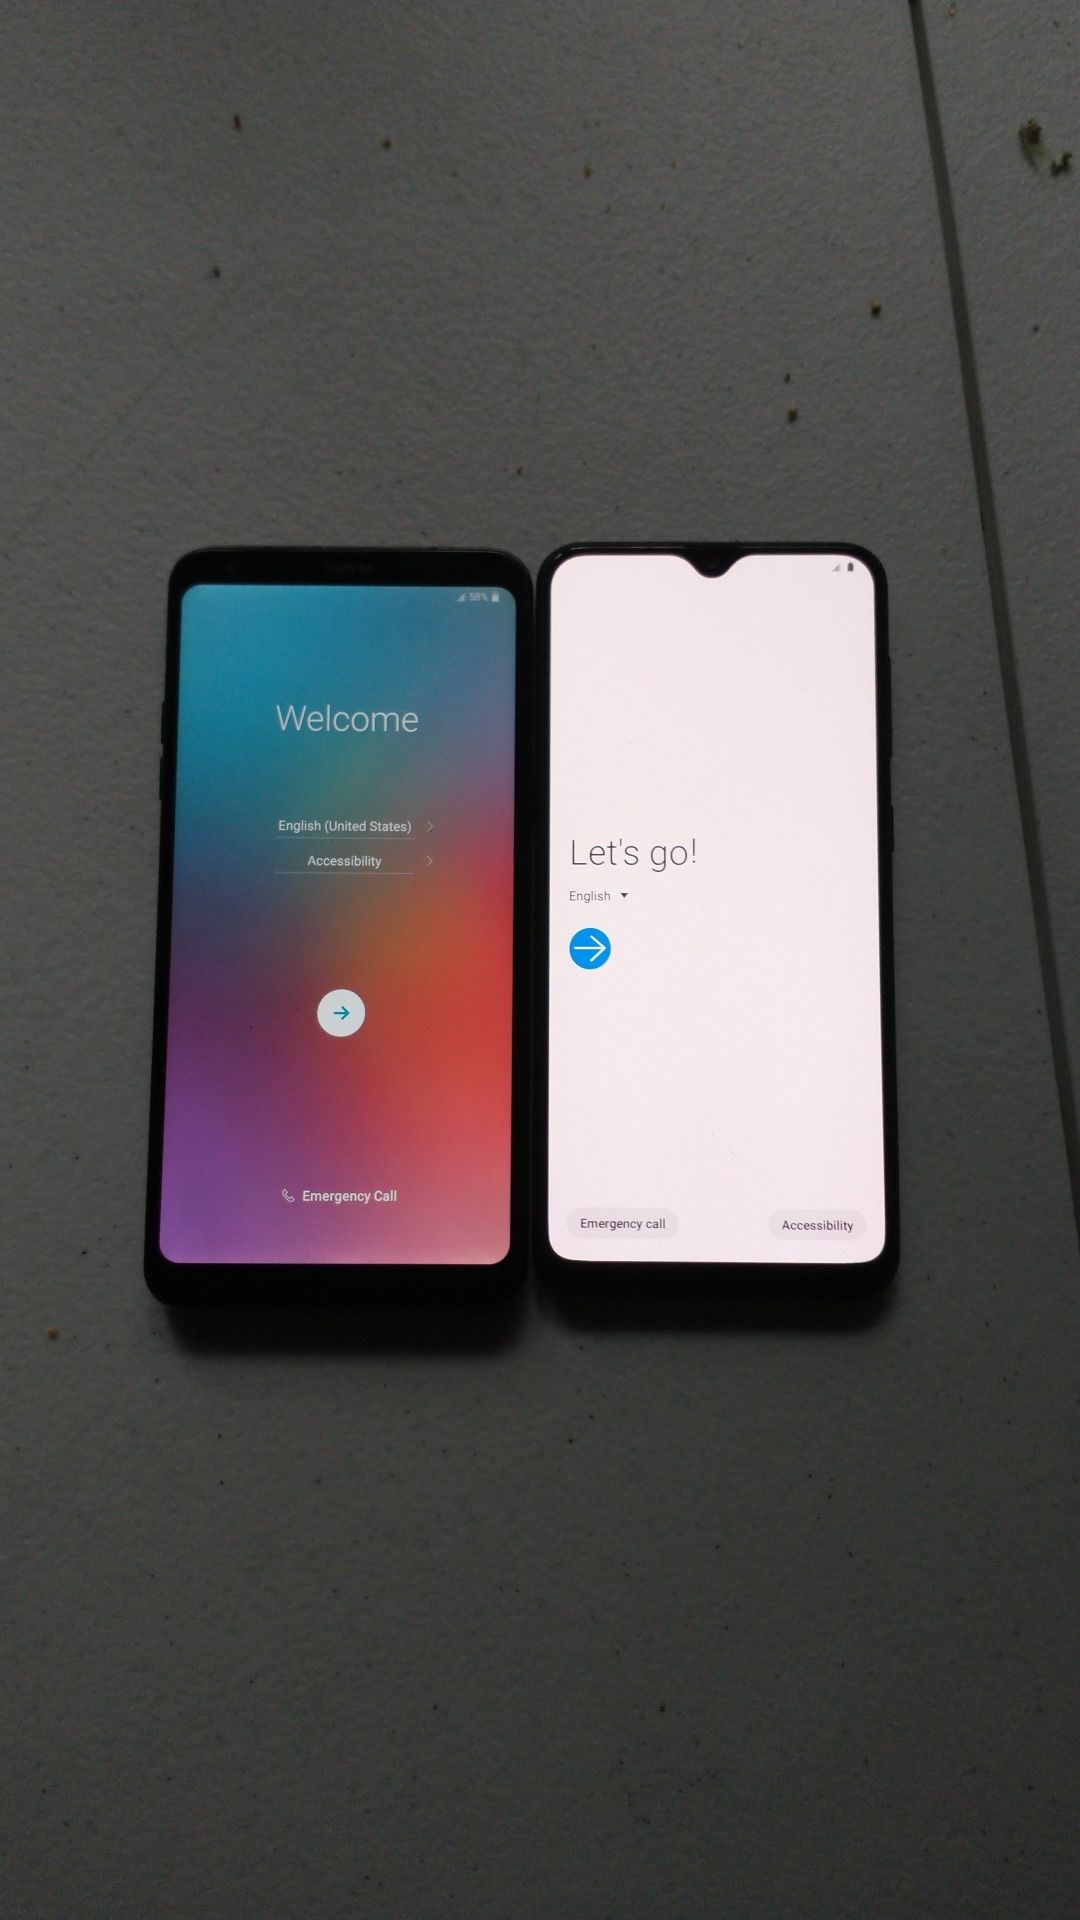 A LG stylo 4 and a Samsung phone Gaxaly A 20